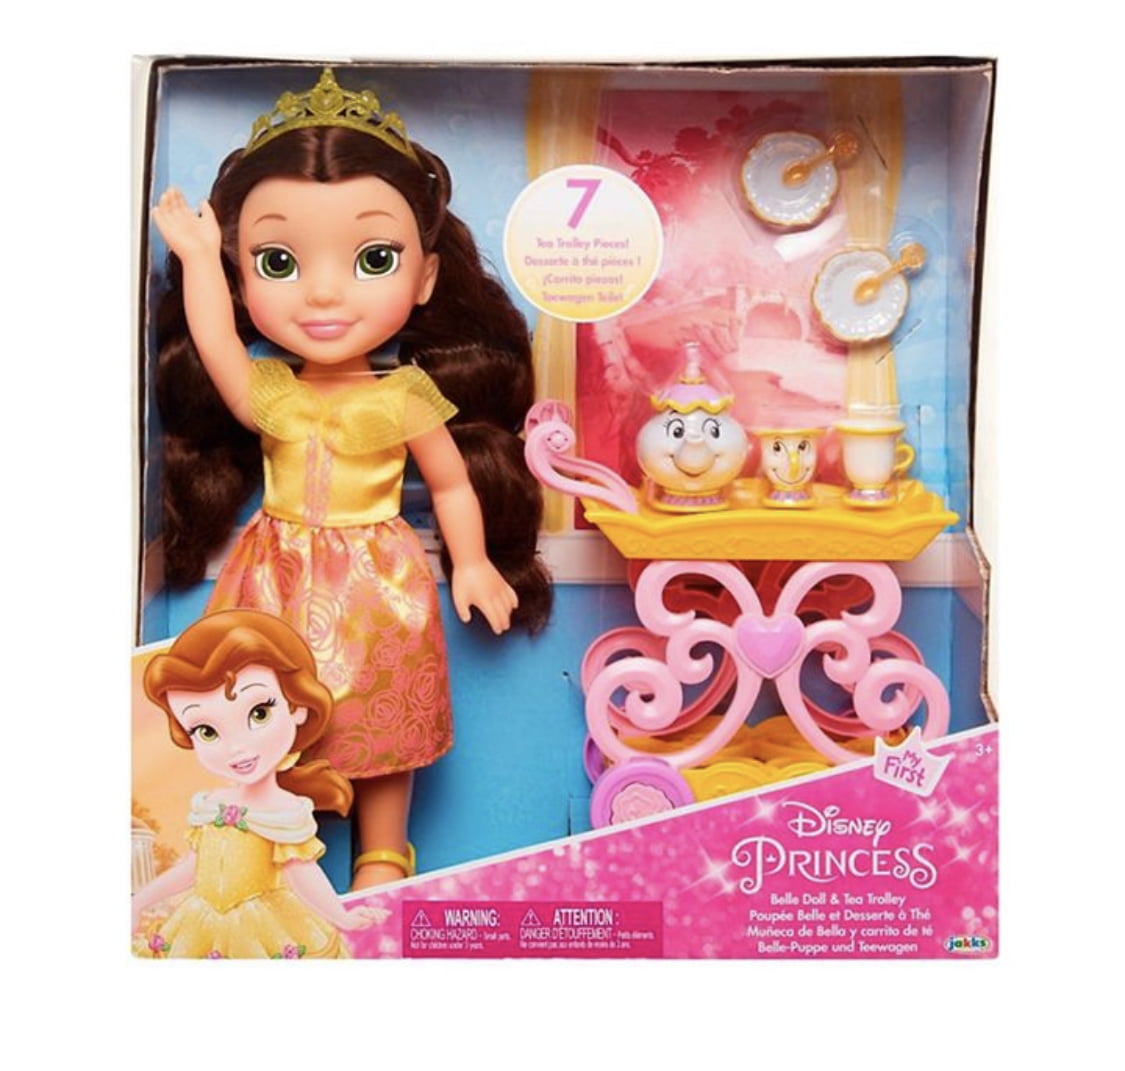 DOLL DREAM SET PRINCESS KIDS GIRLS CART PRETEND TOY ROLE PLAY ACCESSORIES GIFT